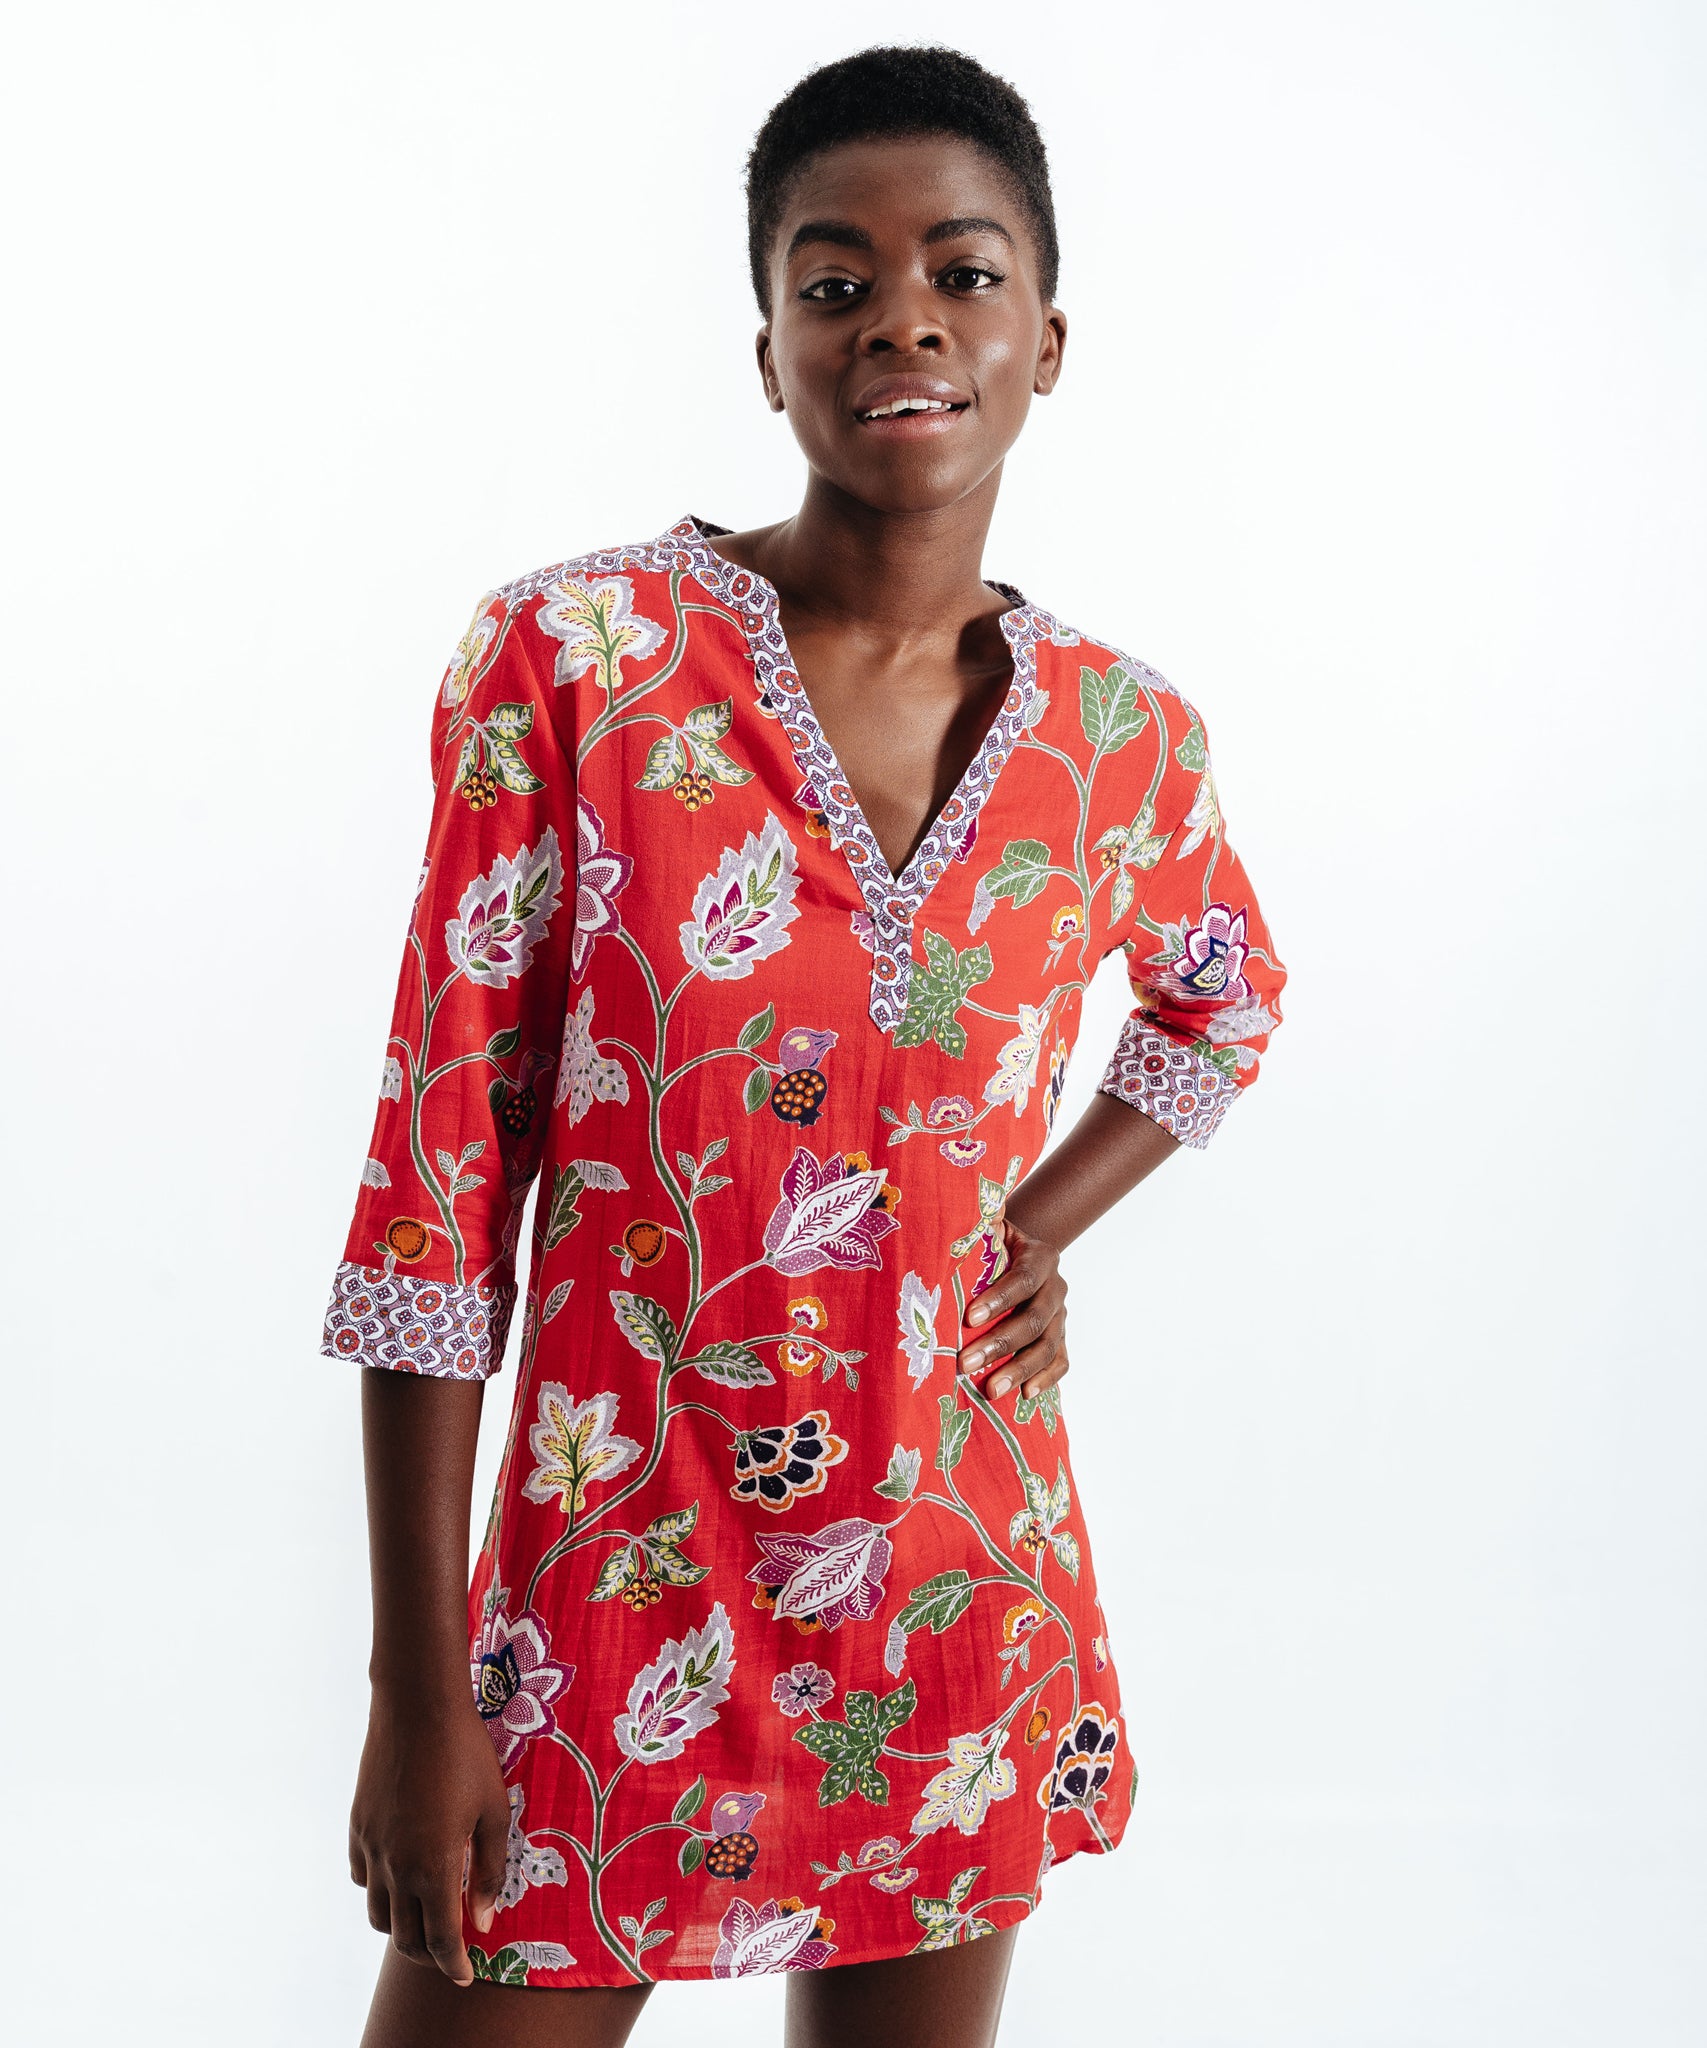 Wanderlust Tunic Dress in color Hibiscus on a model